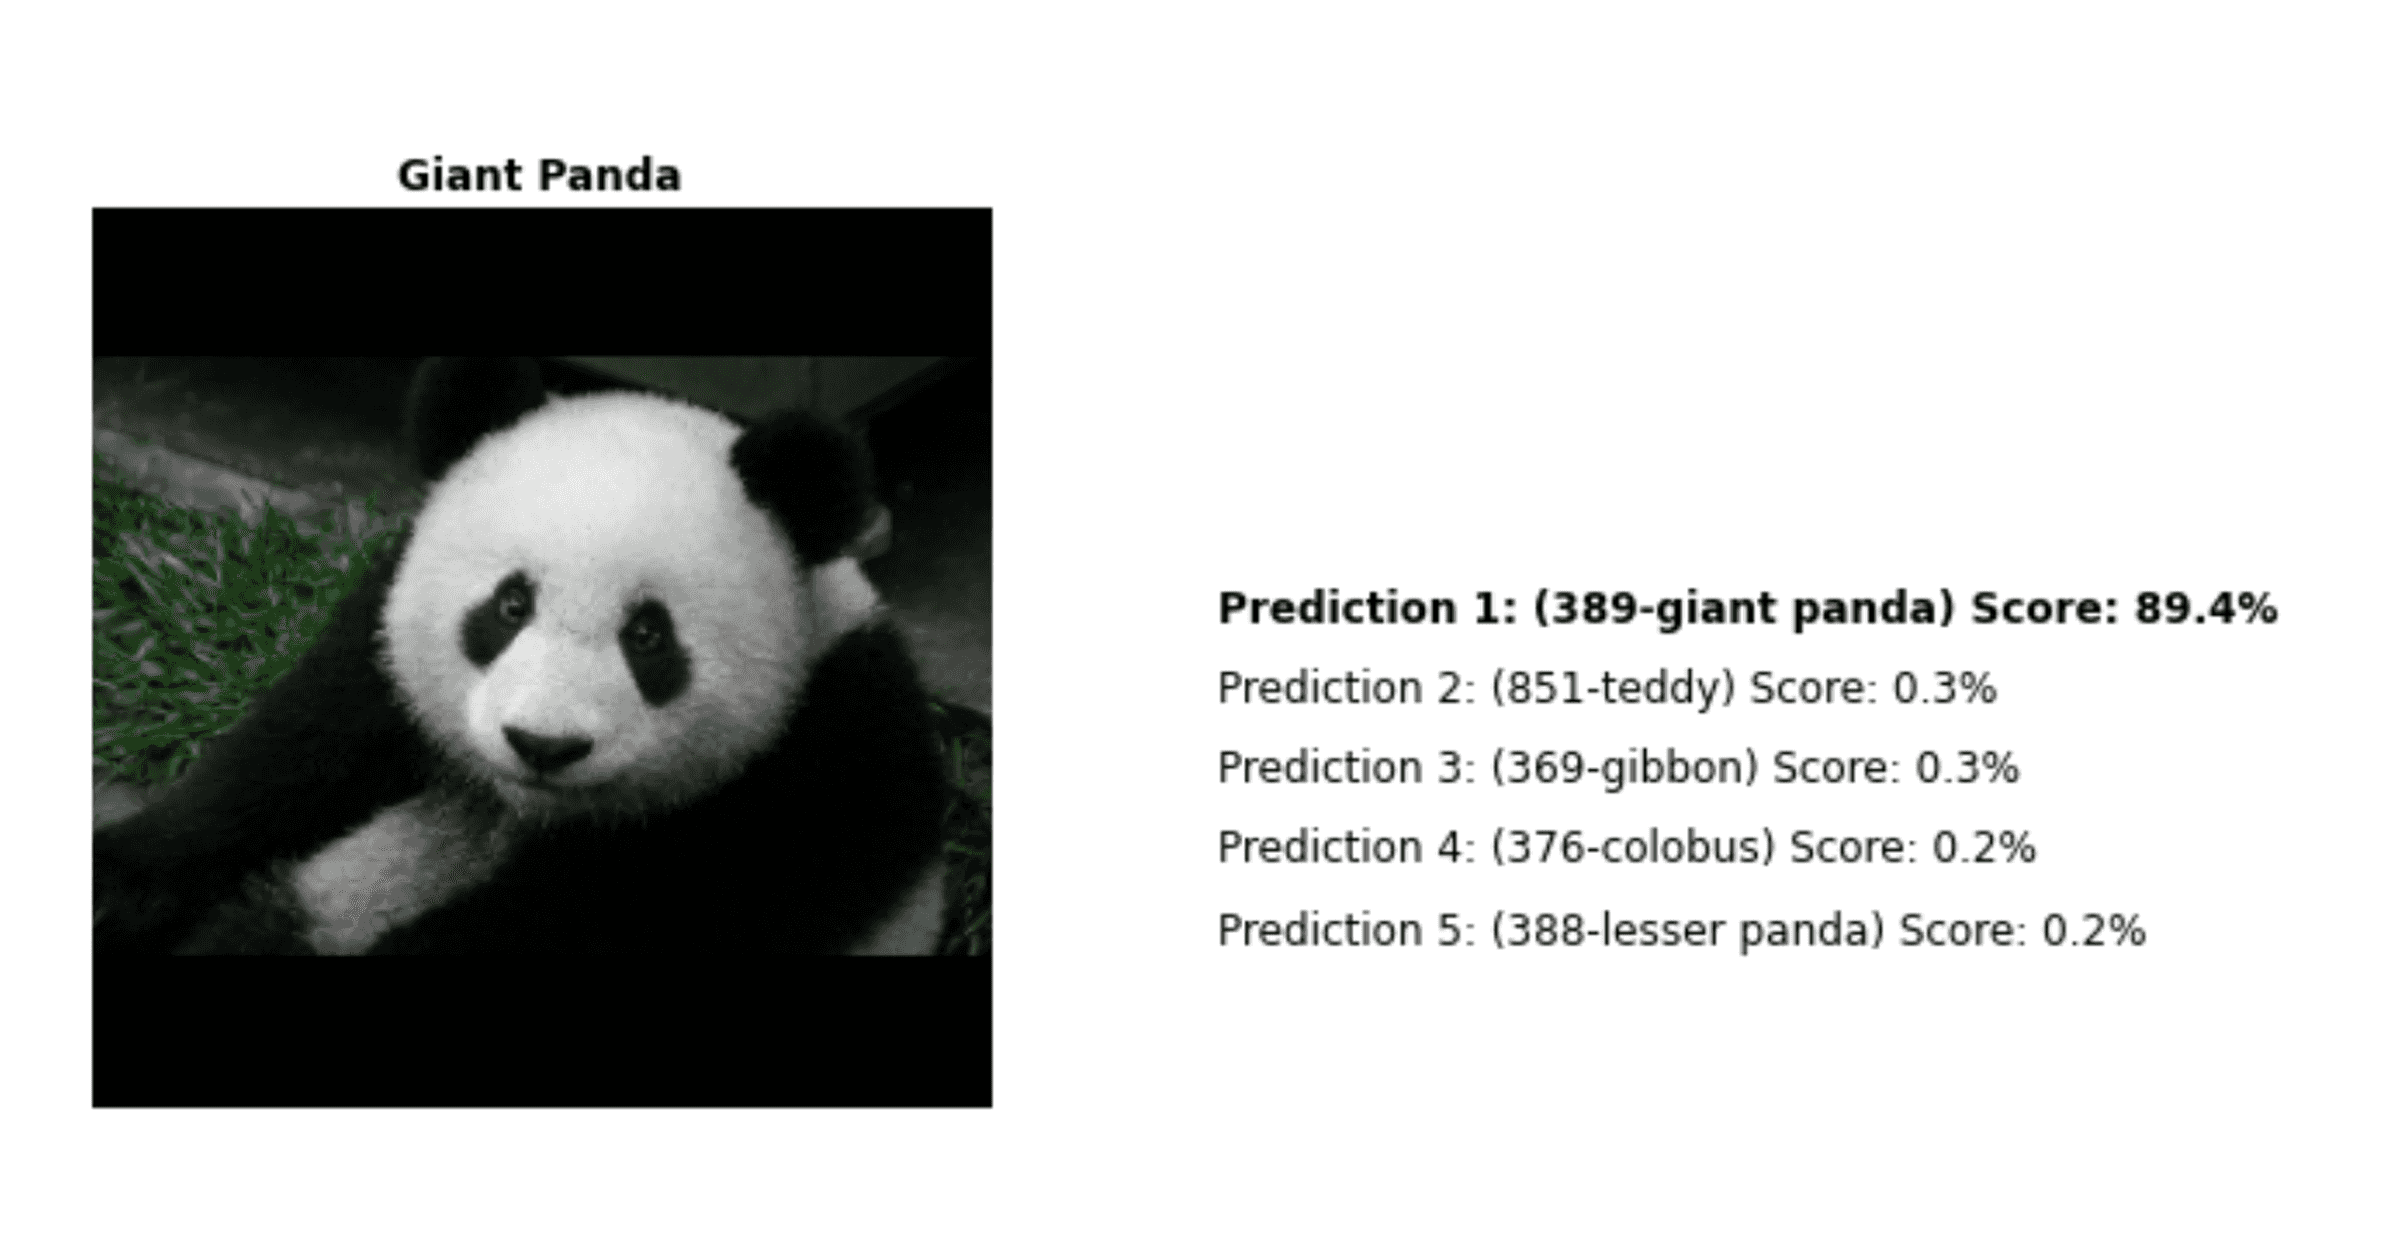 Inception v1 classifies a Panda with 89 percent accuracy